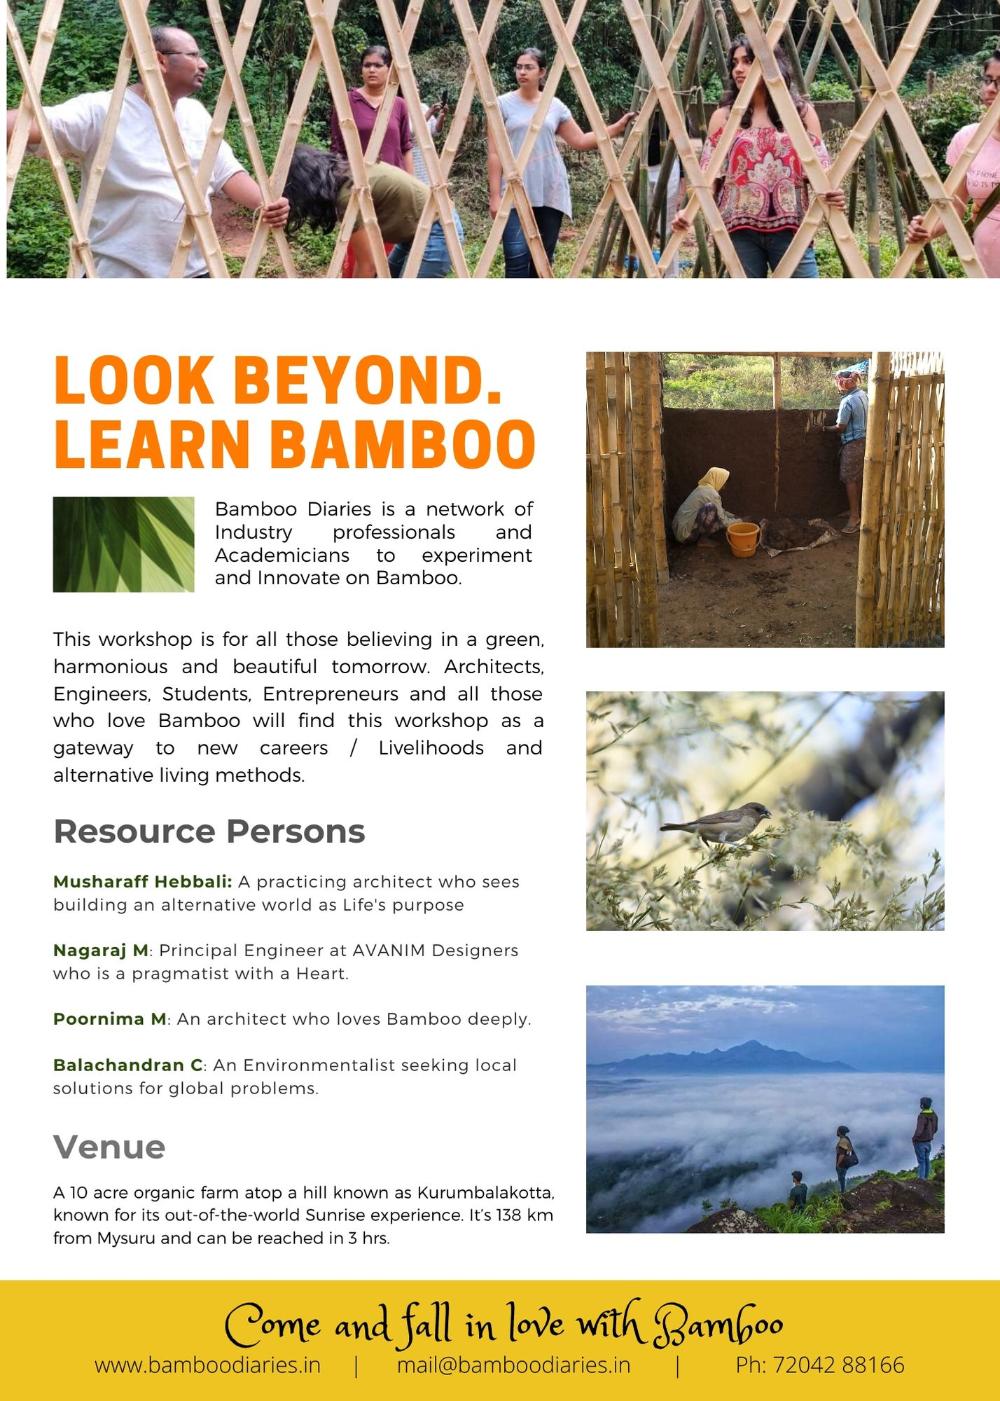 Build a Bamboo House in 3 days